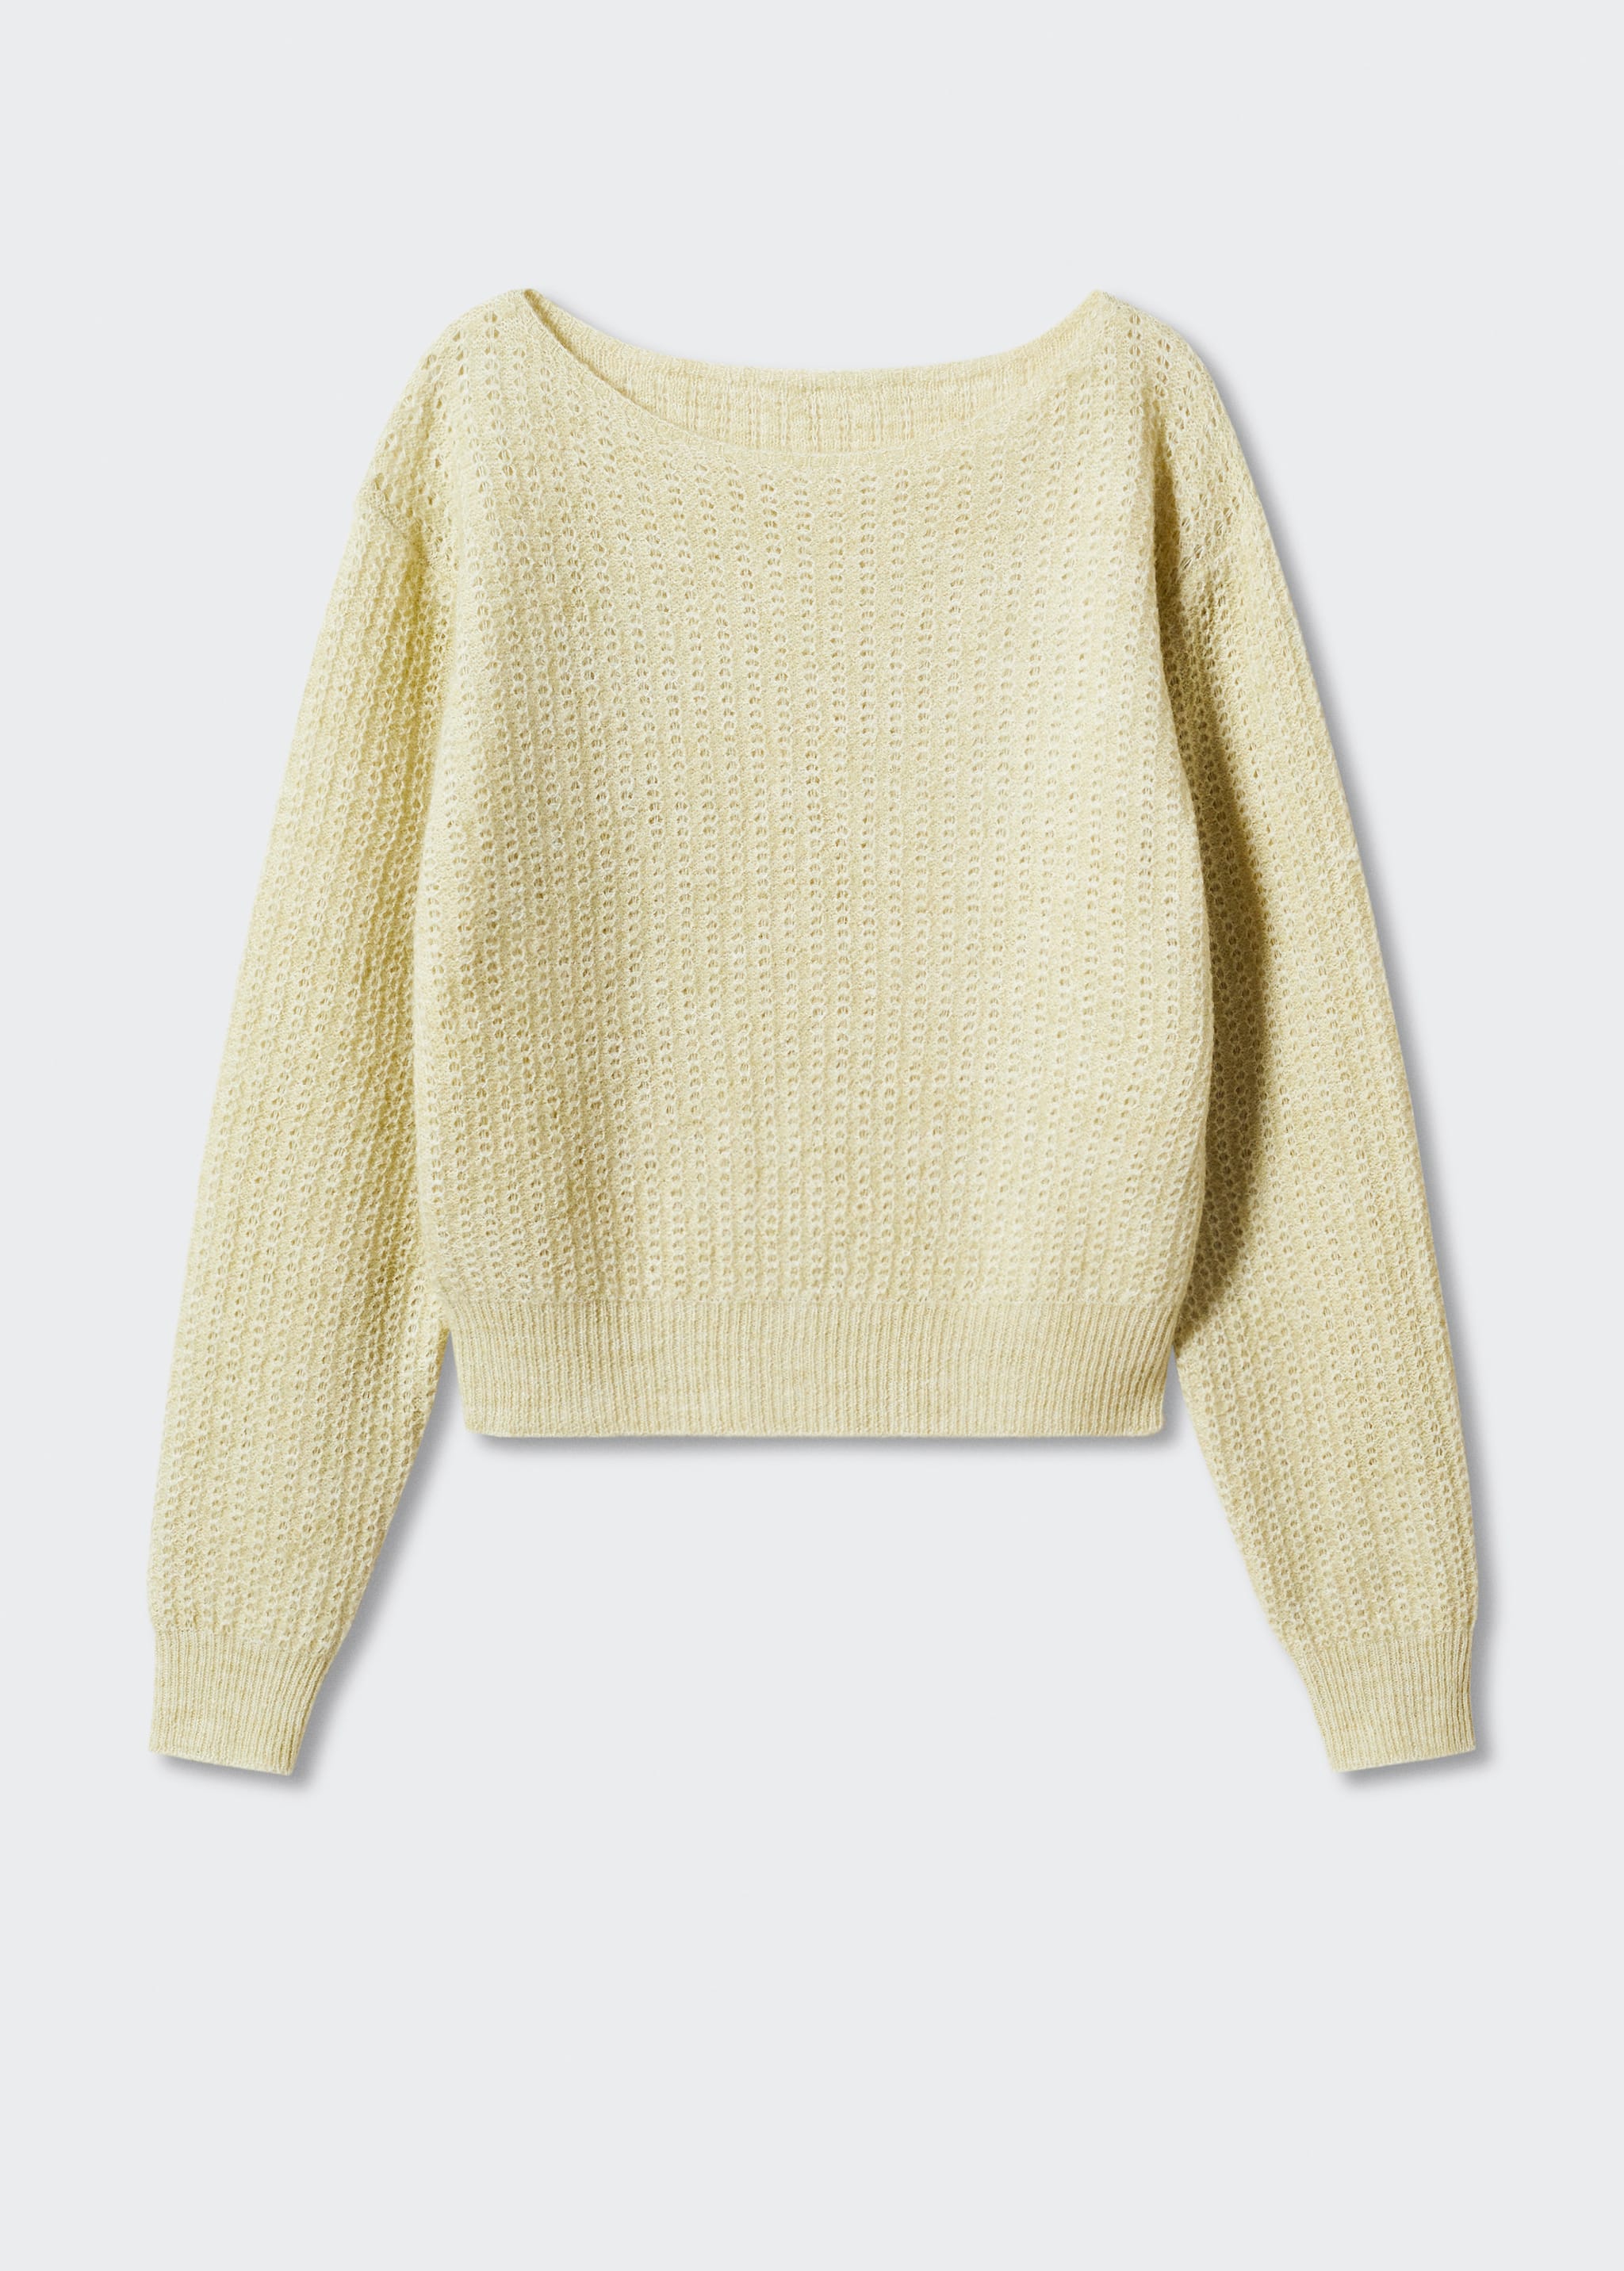 Boat-neck cropped sweater - Article without model